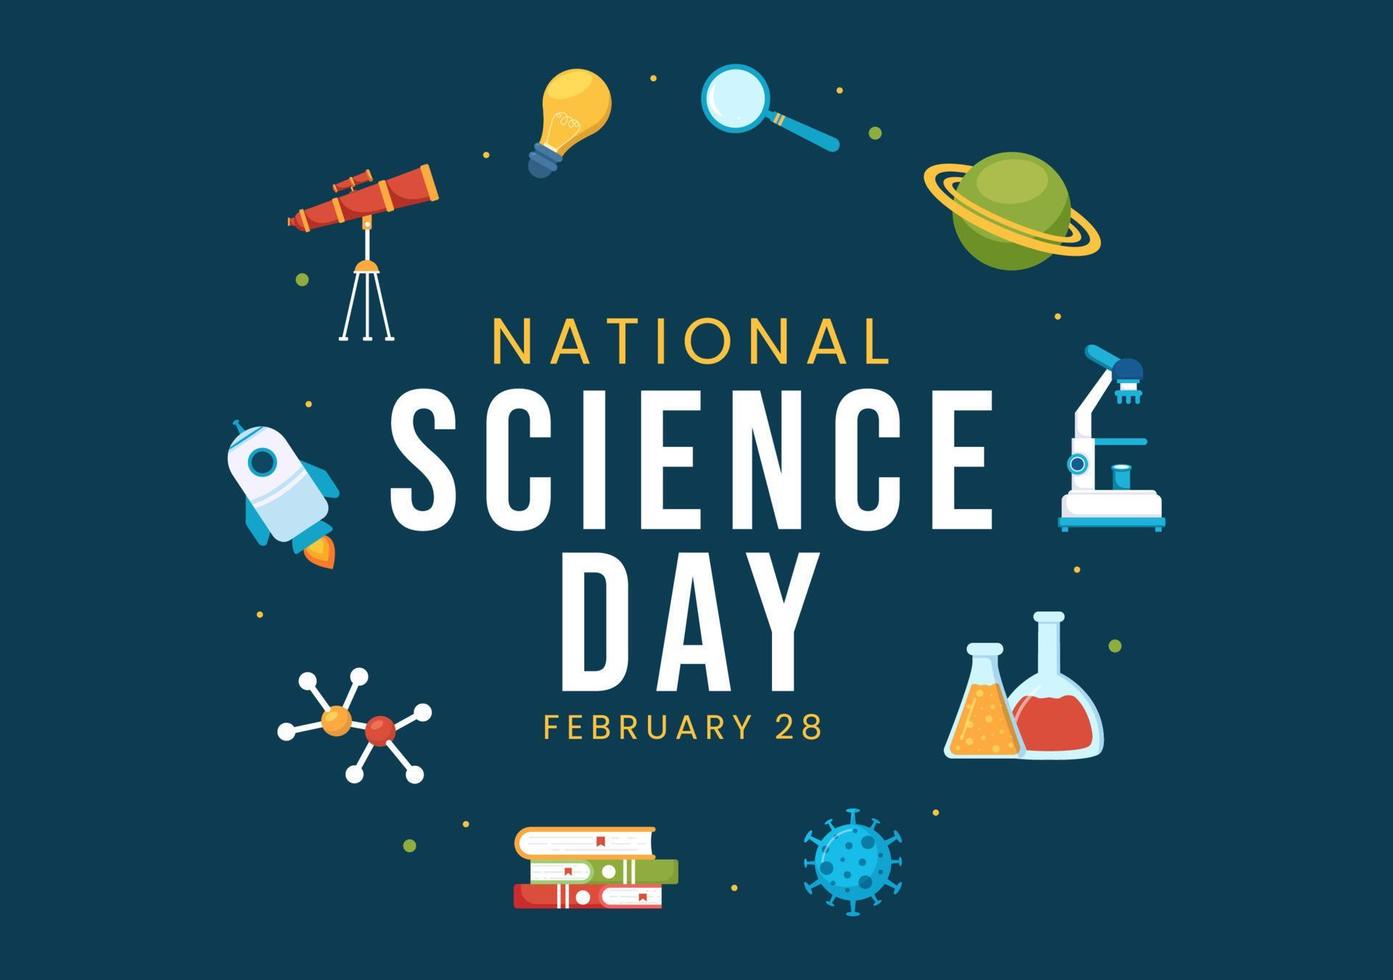 National Science Day February 28 Related to Chemical Liquid, Scientific, Medical and Research in Flat Cartoon Hand Drawn Templates Illustration vector